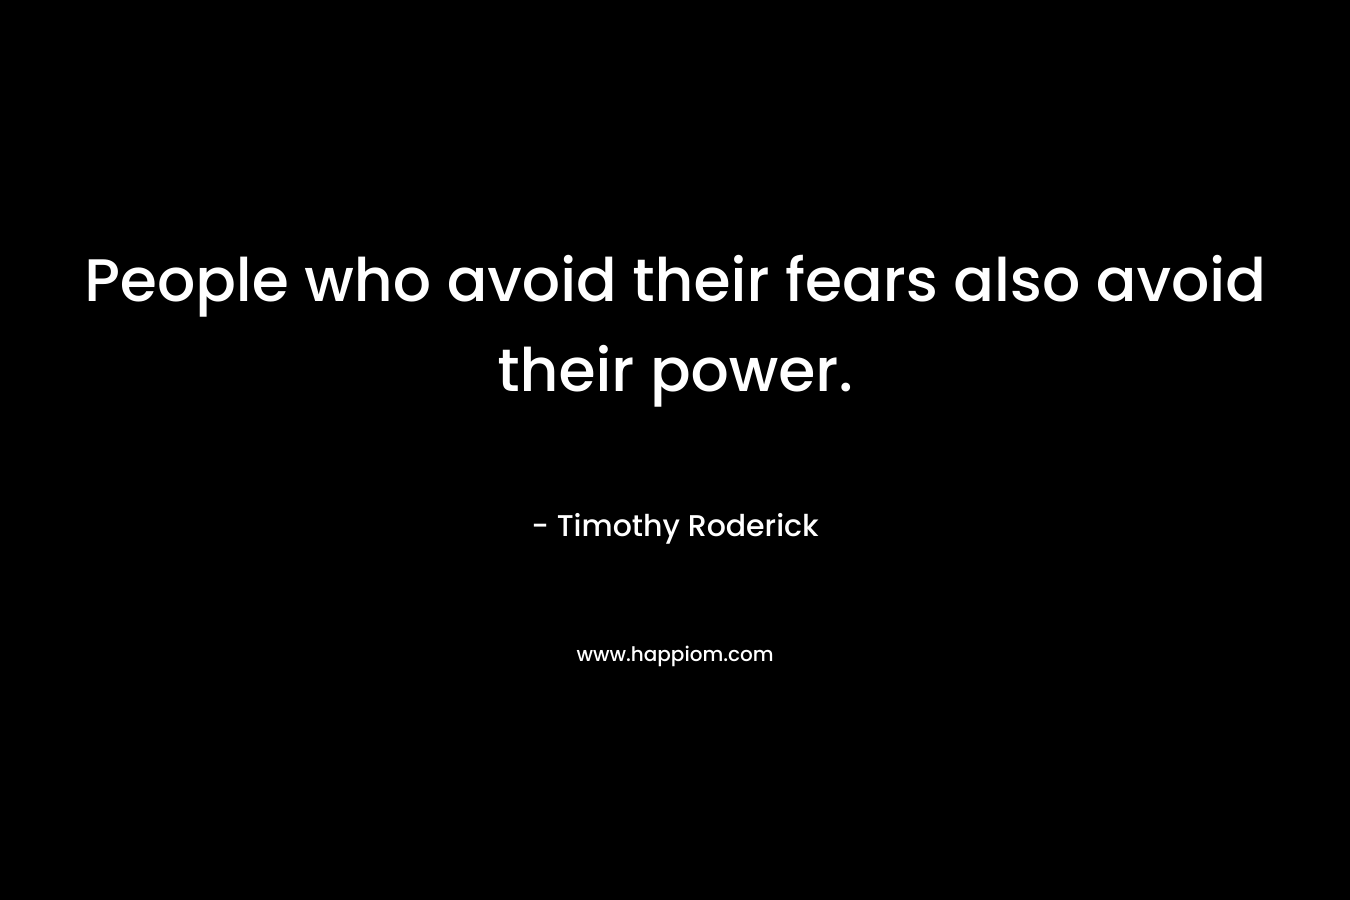 People who avoid their fears also avoid their power.